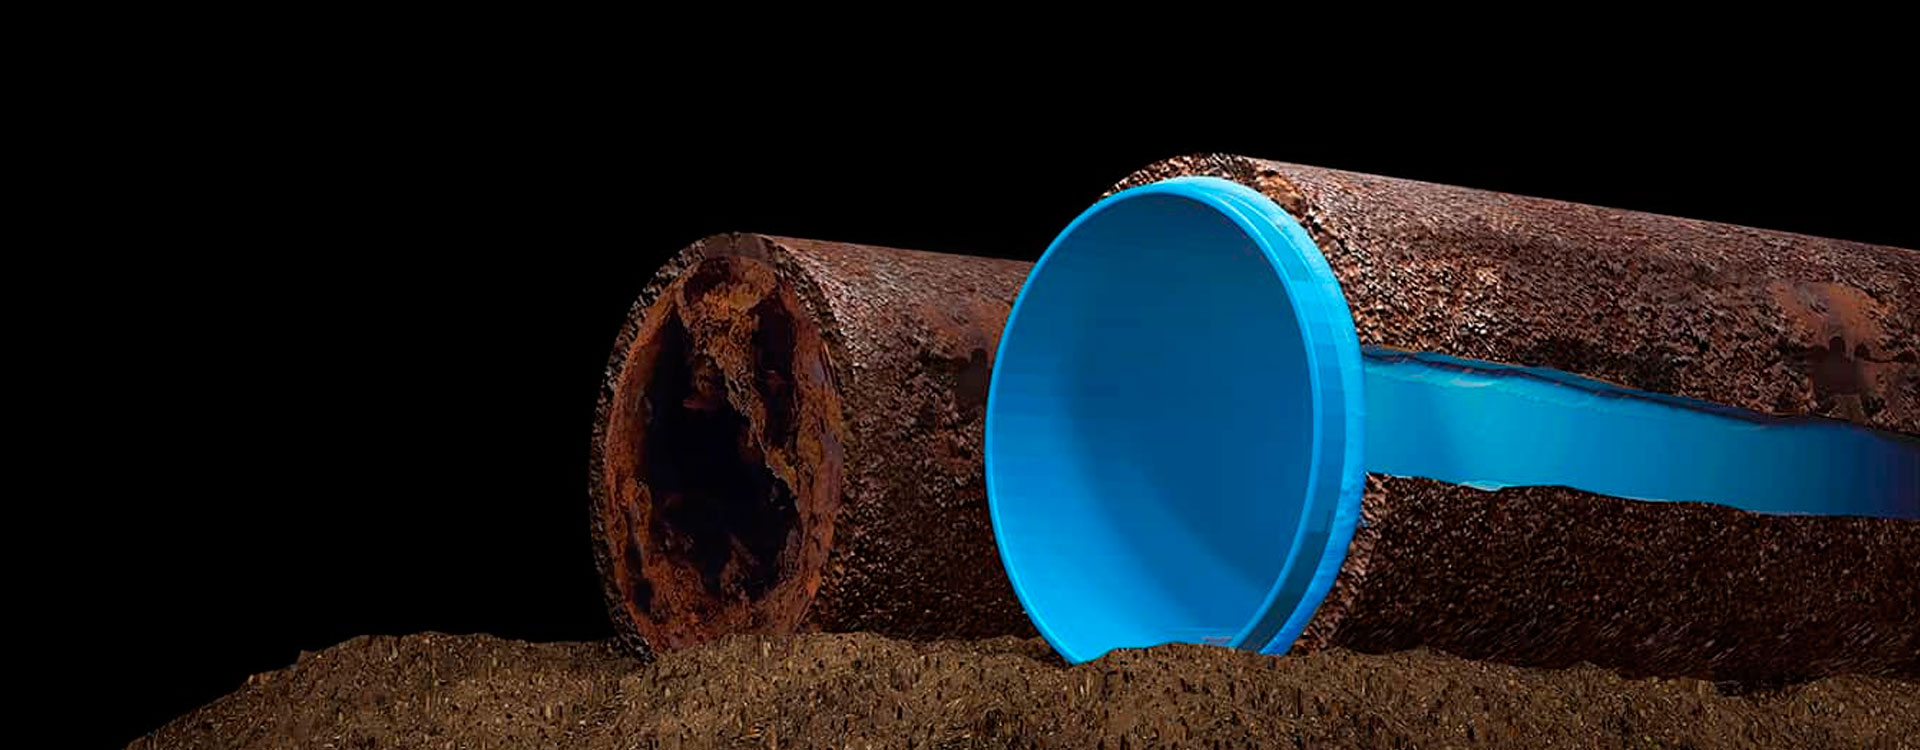 Trenchless pipe lining